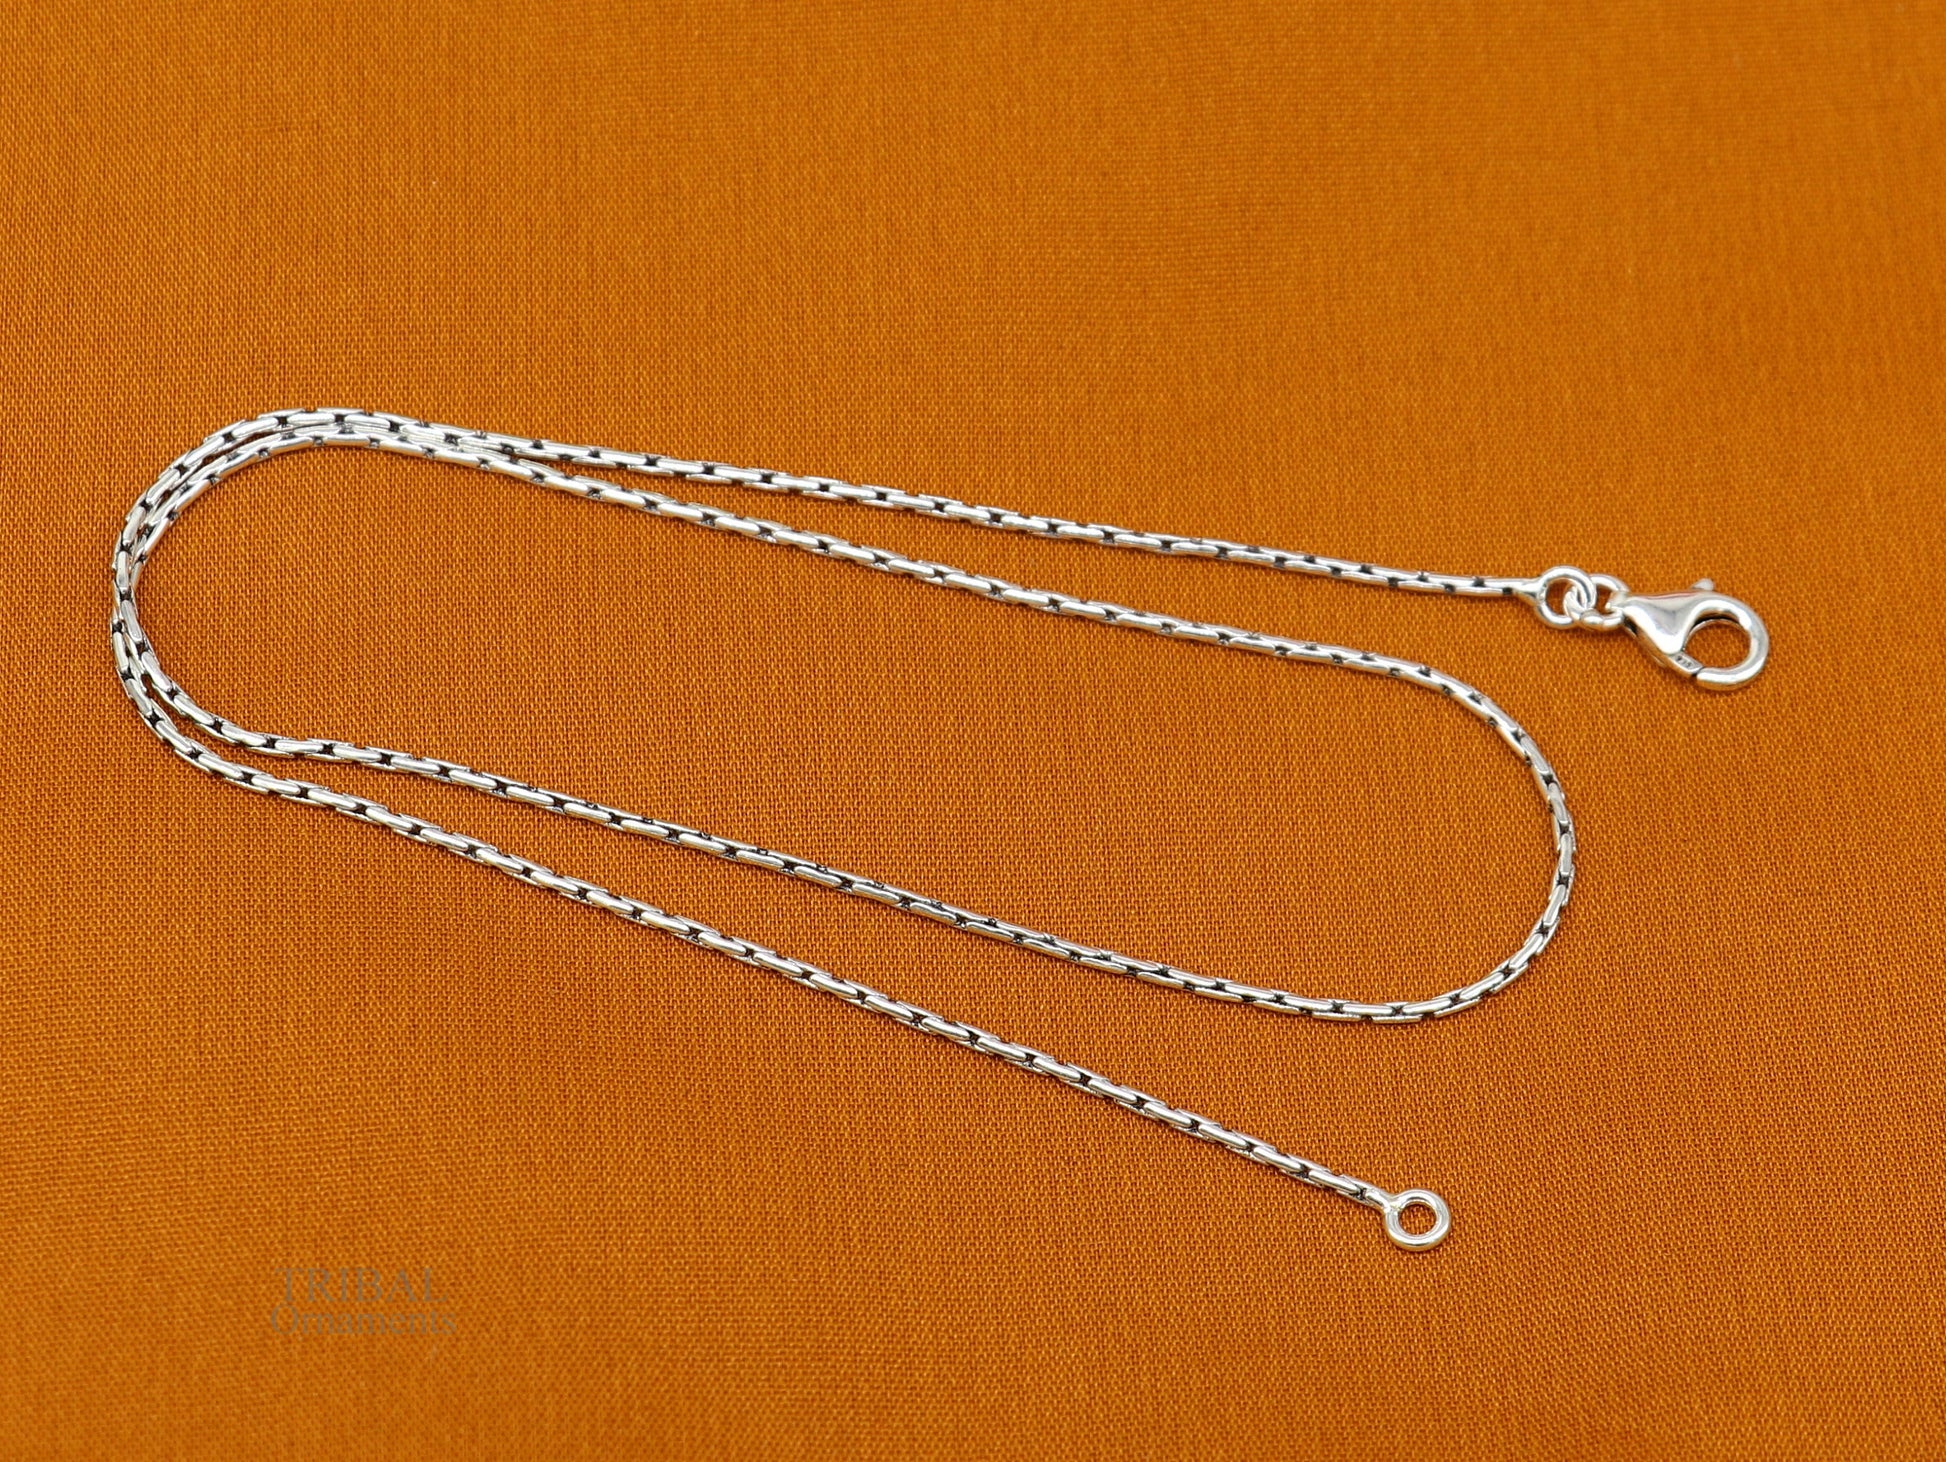 All size 1mm 925 sterling silver handmade solid fancy stylish silver chain necklace baht chain best gifting jewelry from India ch152 - TRIBAL ORNAMENTS